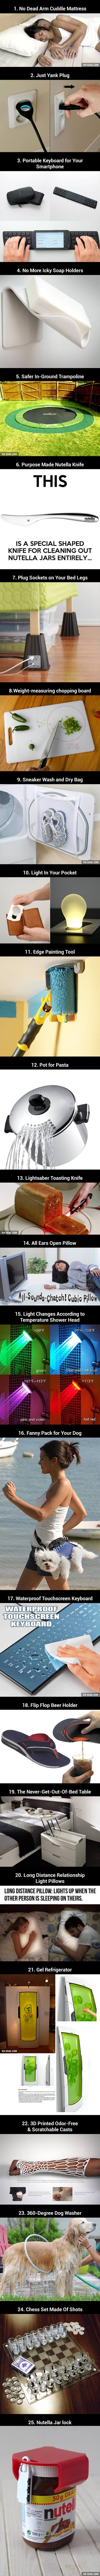 25 Just Really Cool Inventions